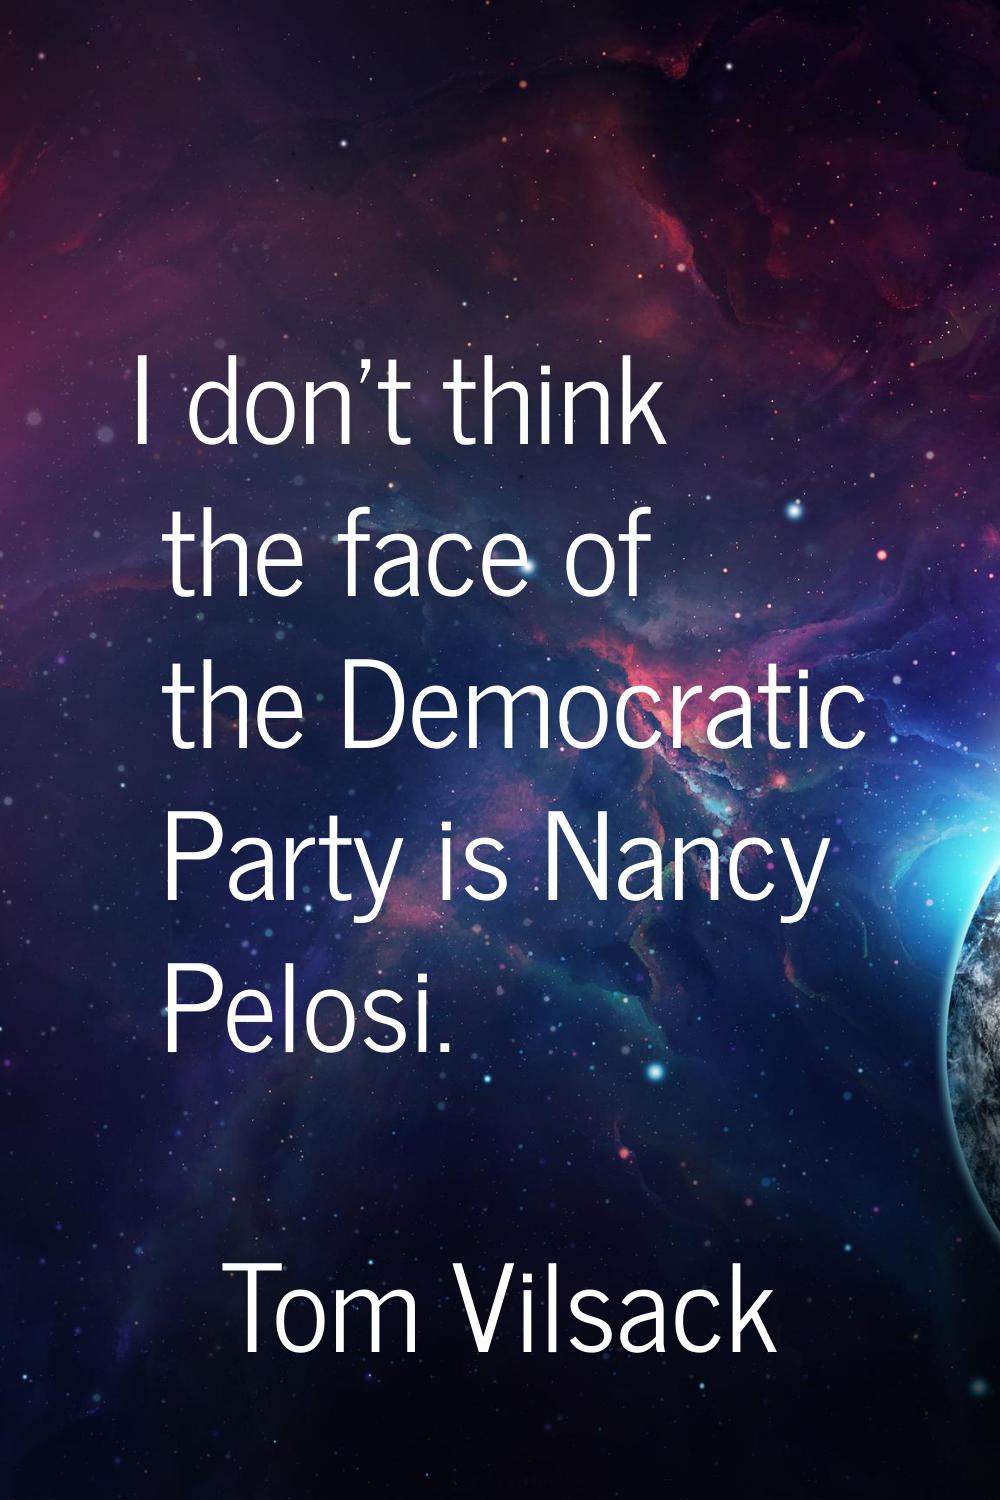 I don't think the face of the Democratic Party is Nancy Pelosi.